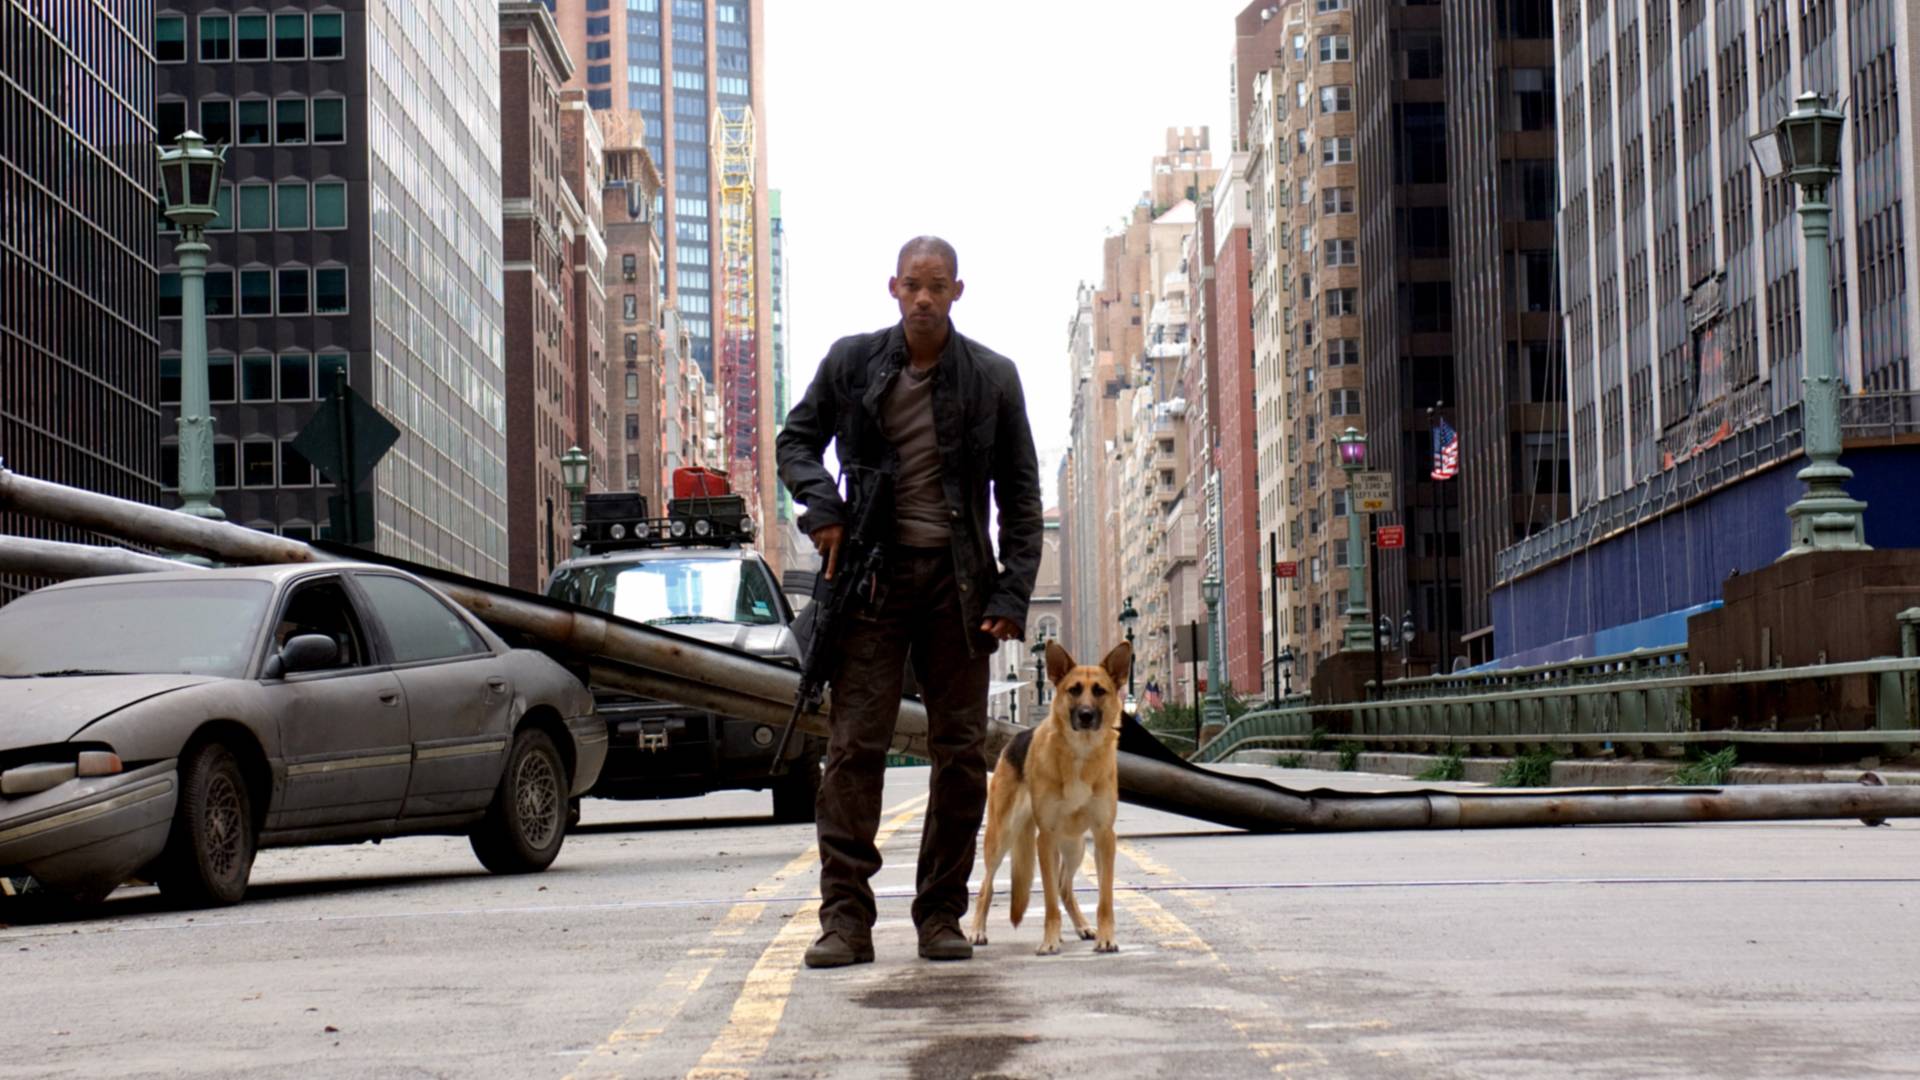 will smith and dog in i am legend showing that walking is great